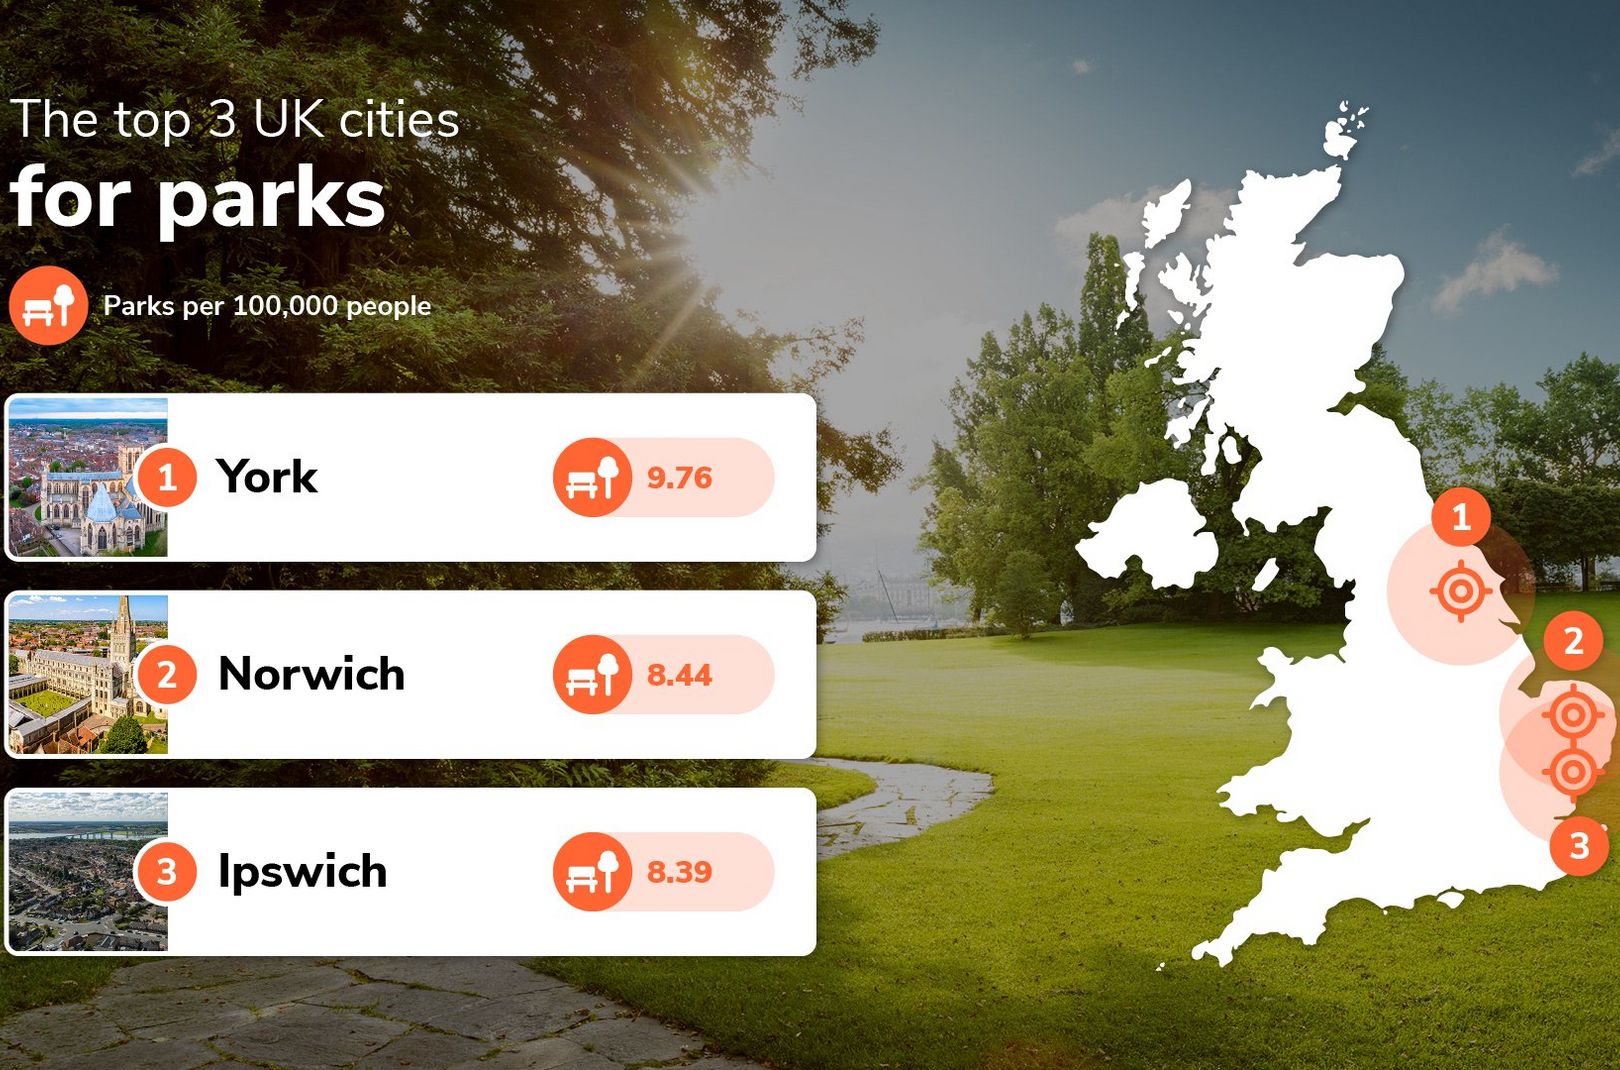 The UK’s top 3 cities for parks